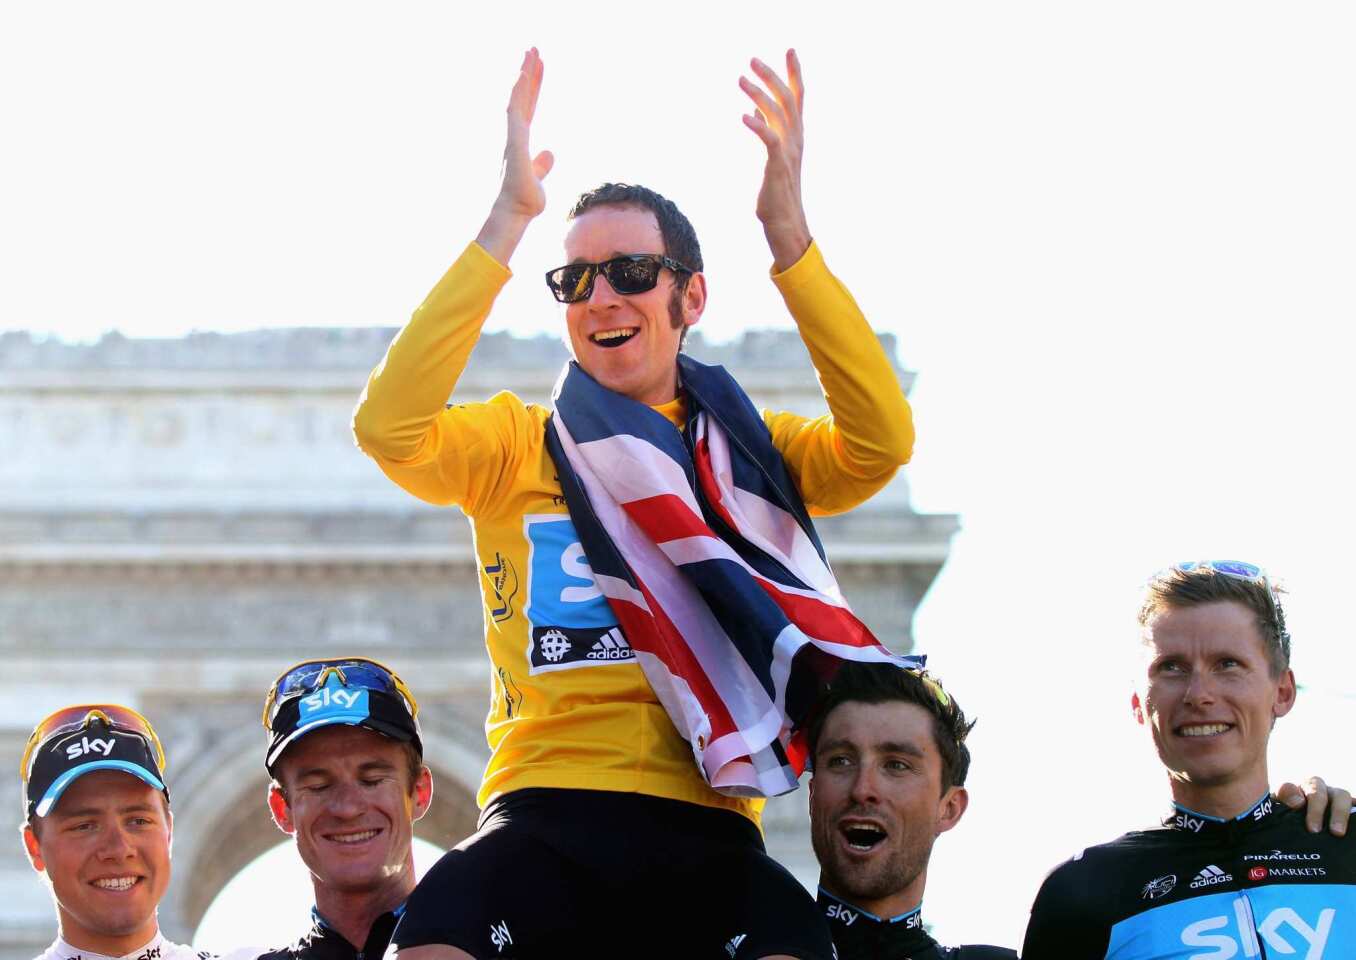 Bradley Wiggins of Great Britain on the Sky Pro Cycling team, top, celebrates with teammates Edvald Boasson Hagen, left, Michael Rogers, Bernhard Eisel and Christian Knees after winning the 2012 Tour de France last Sunday.